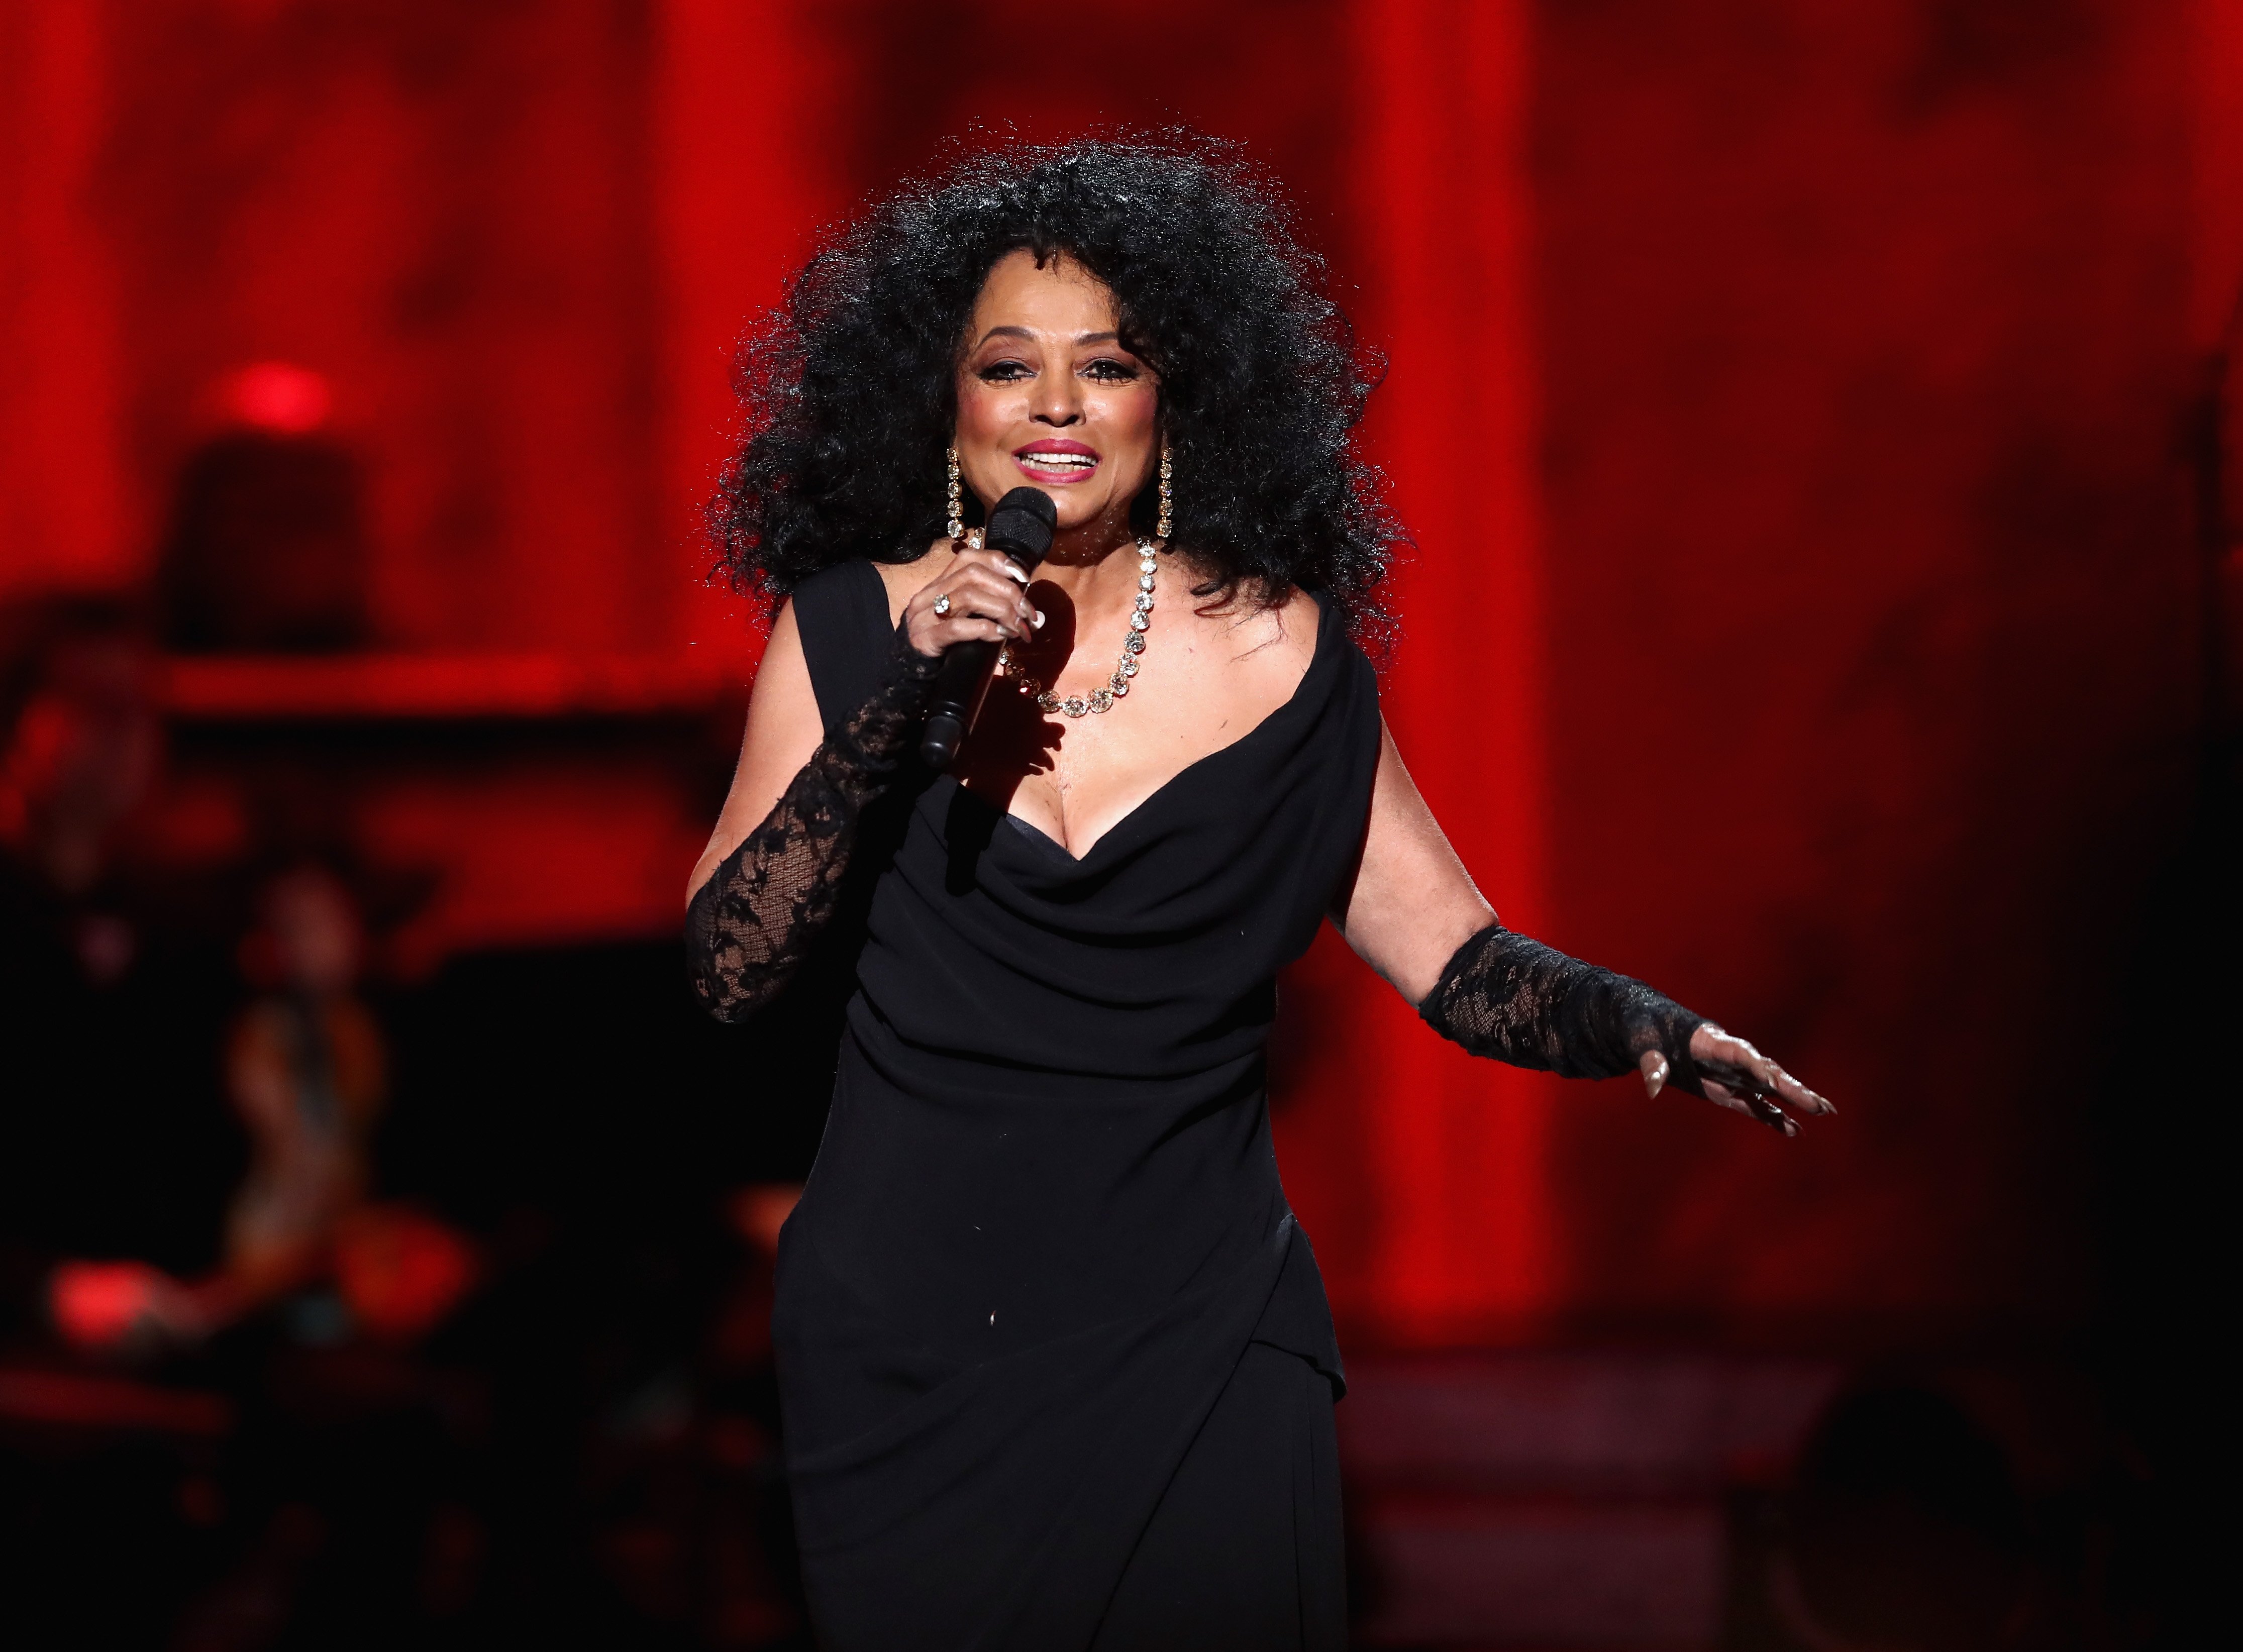 Diana Ross performs onstage during Motown 60: A GRAMMY Celebration at Microsoft Theater on February 12, 2019. | Photo: Getty Images